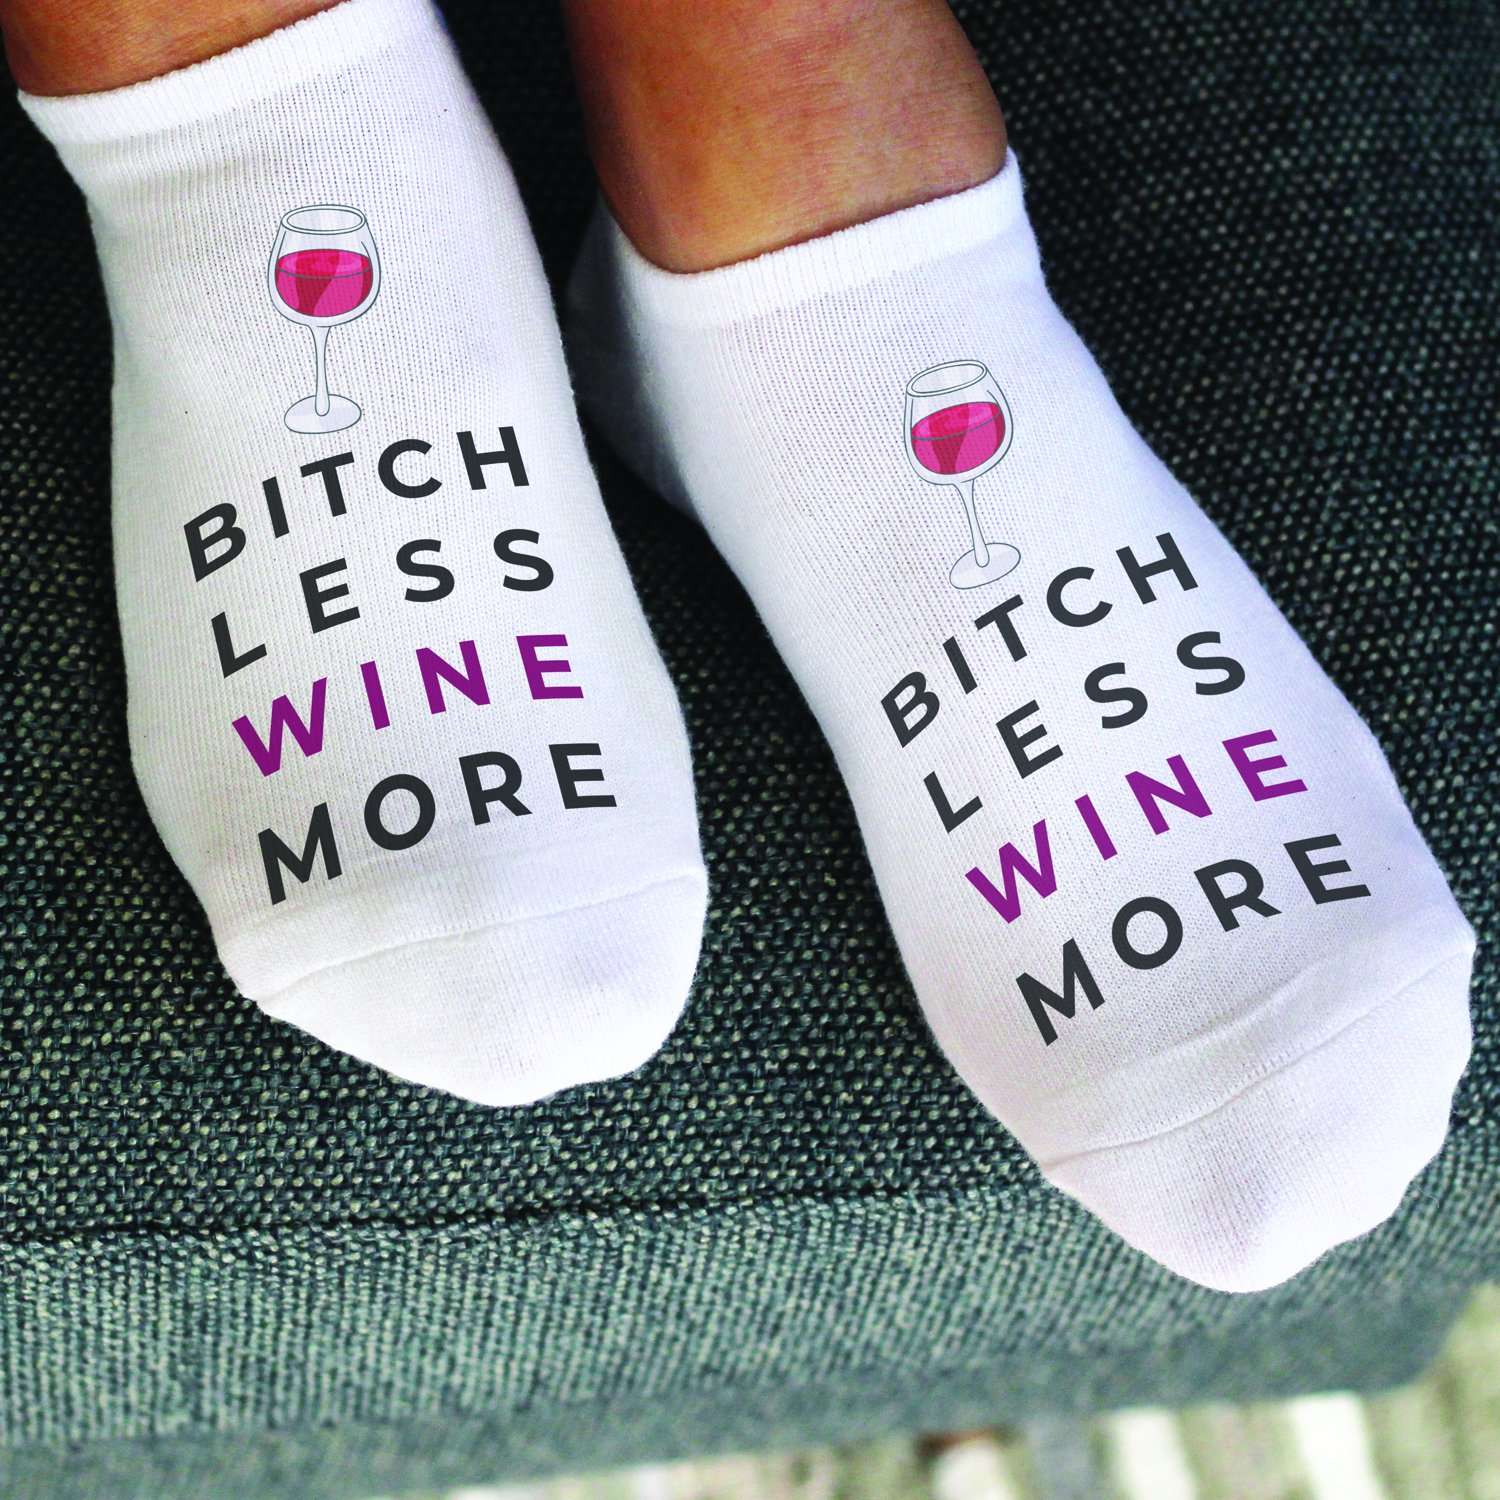 Special socks for your favorite friends are these Bitch less wine more design custom printed on white cotton no show socks.